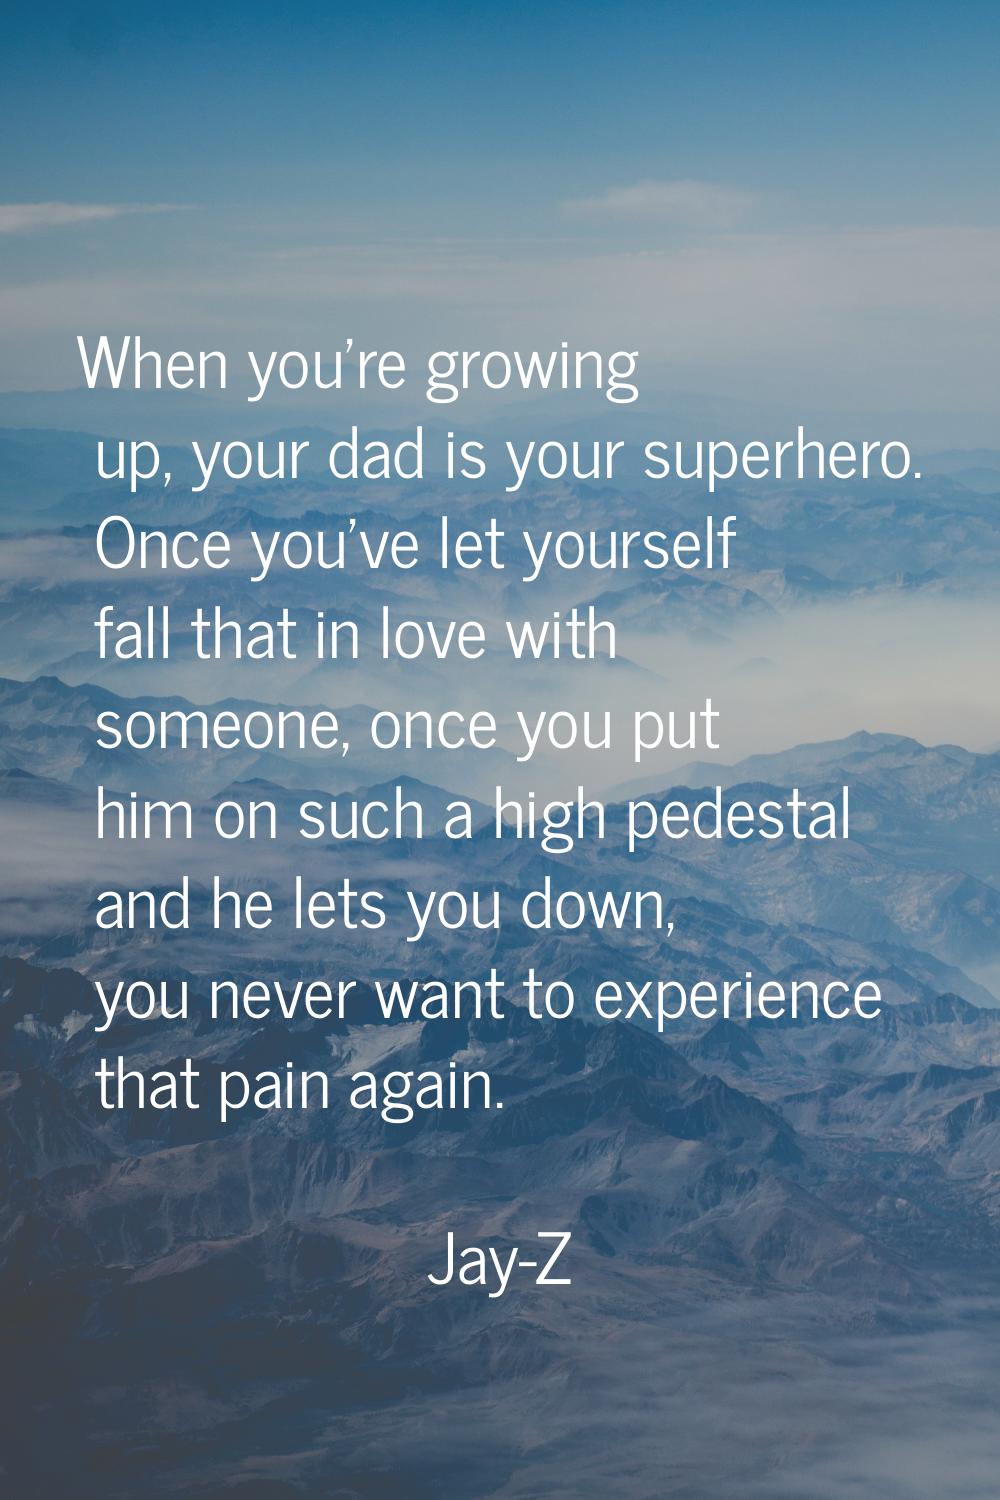 When you're growing up, your dad is your superhero. Once you've let yourself fall that in love with